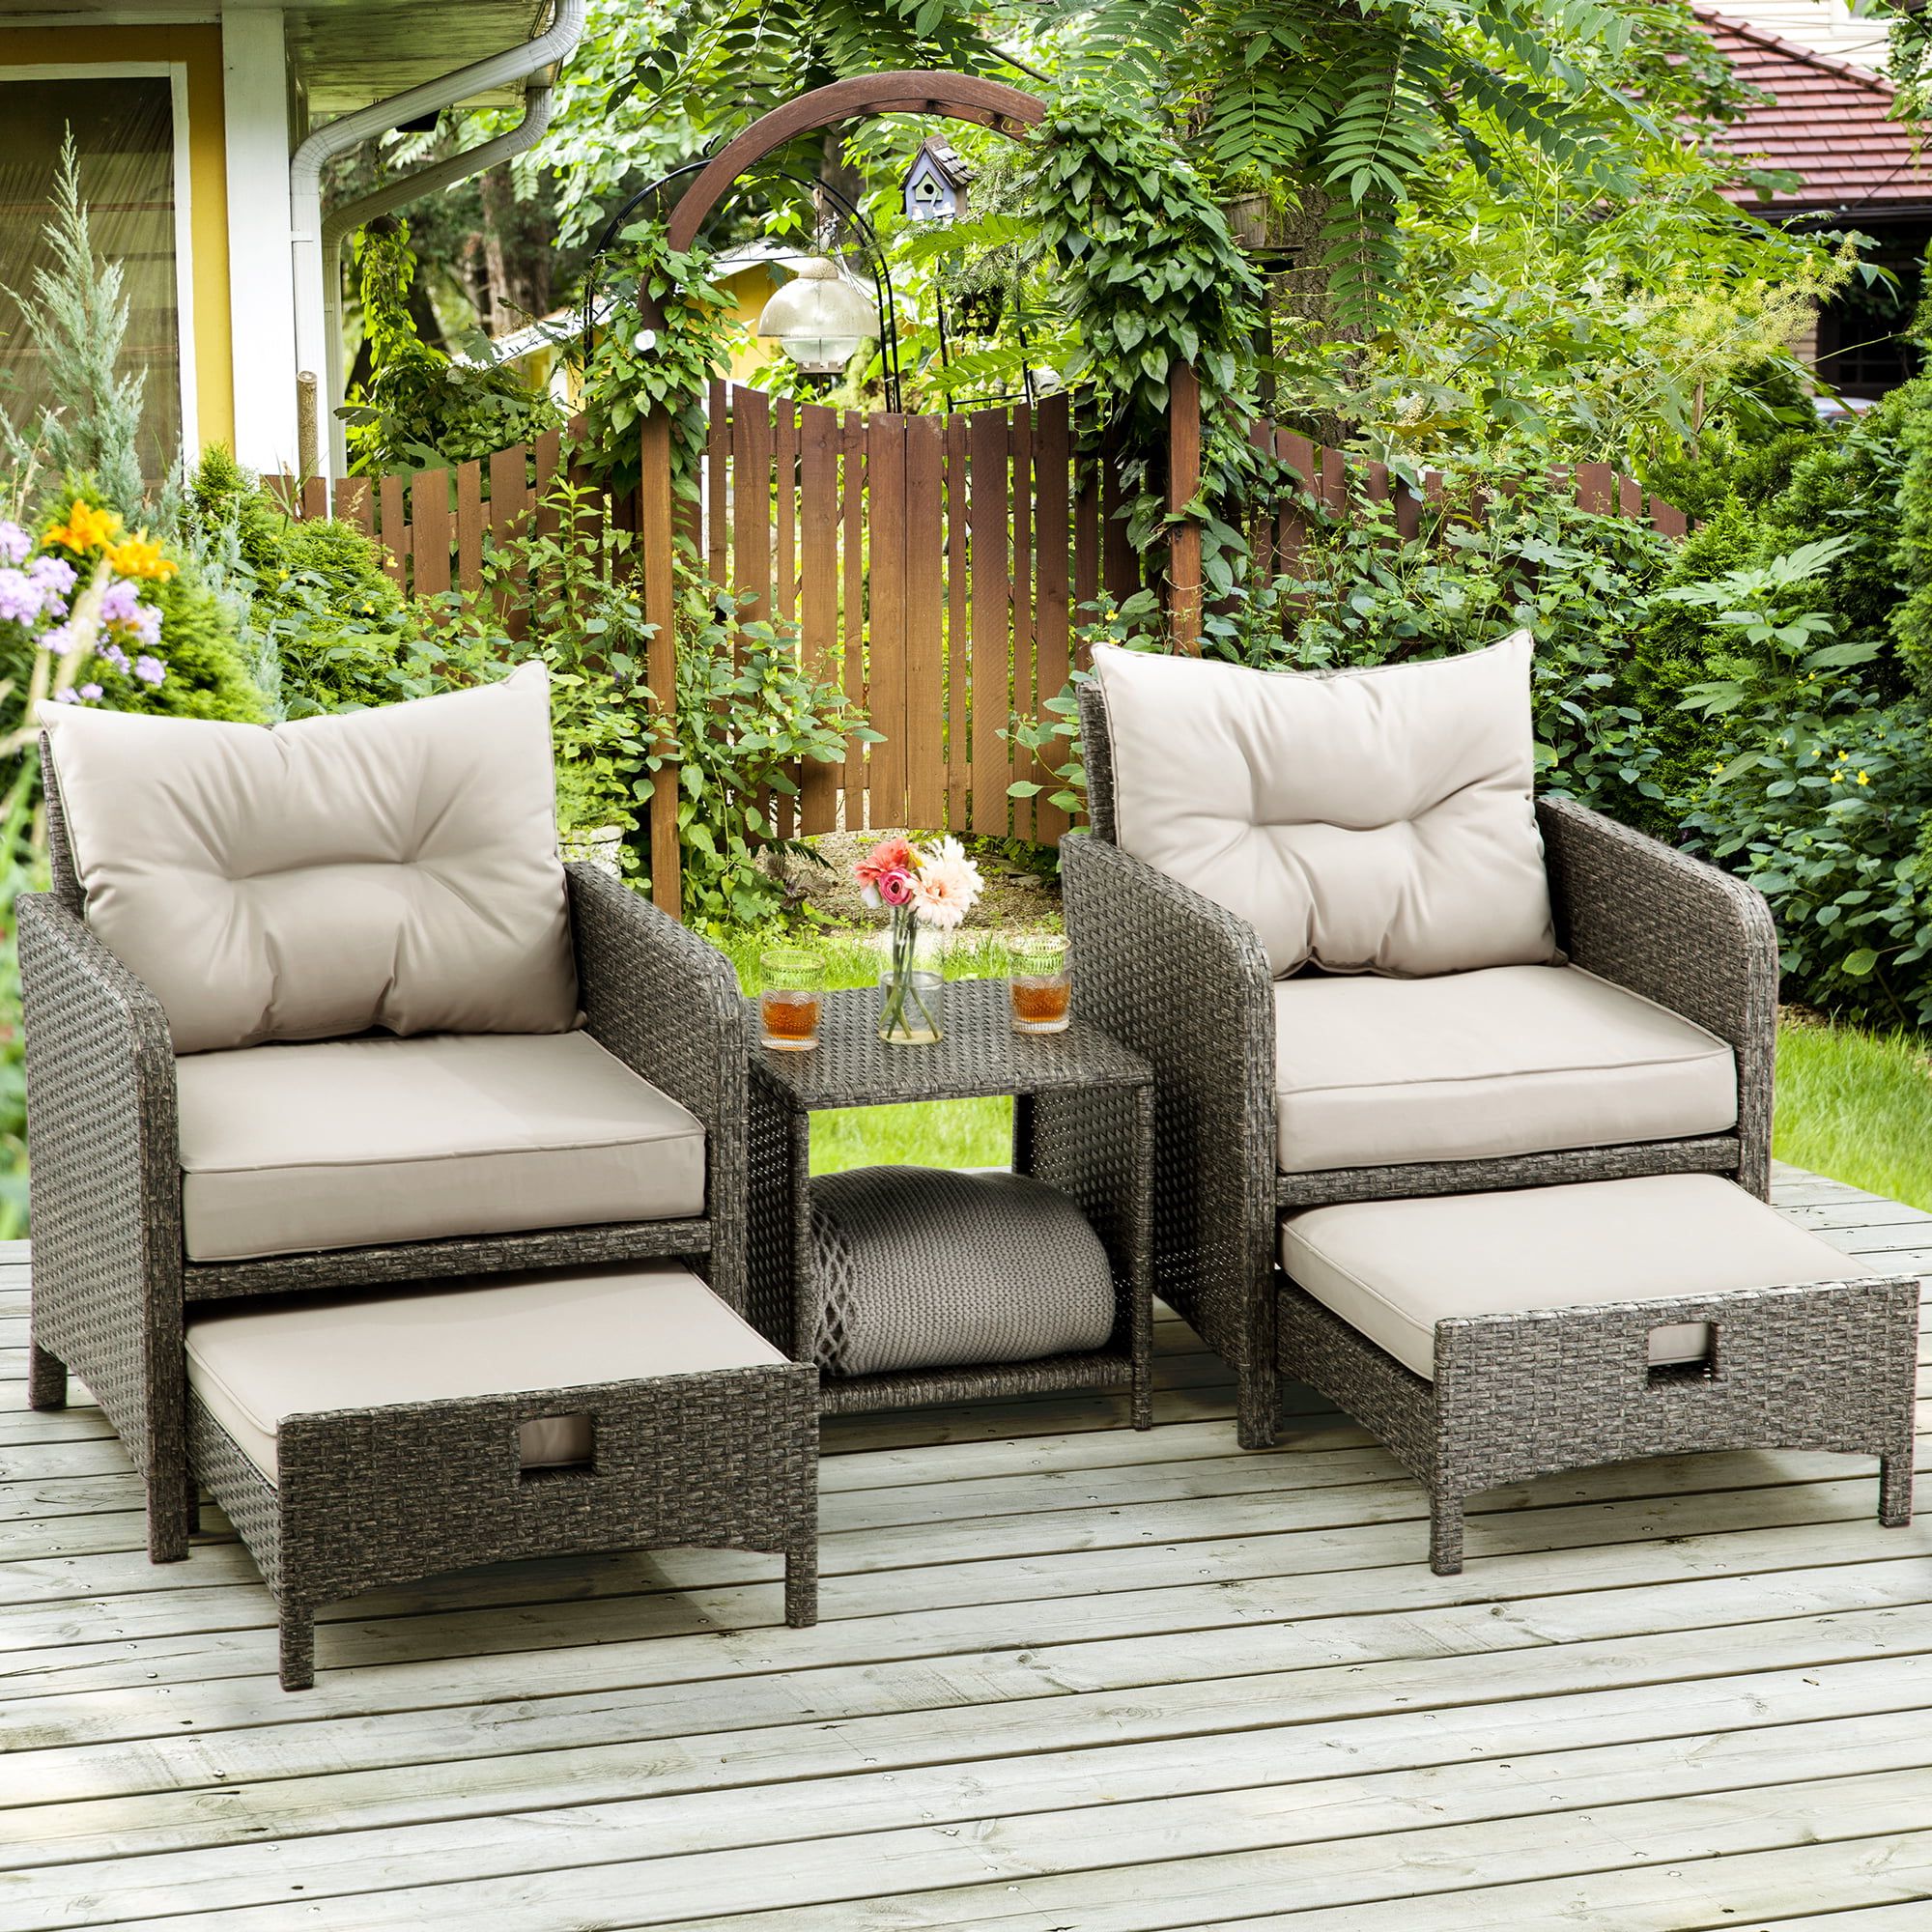 Pamapic 5 Pieces Wicker Patio Furniture Set Outdoor Patio Chairs With  Ottomans (gray) – Walmart Intended For Trendy 5 Piece Patio Conversation Set (View 10 of 16)